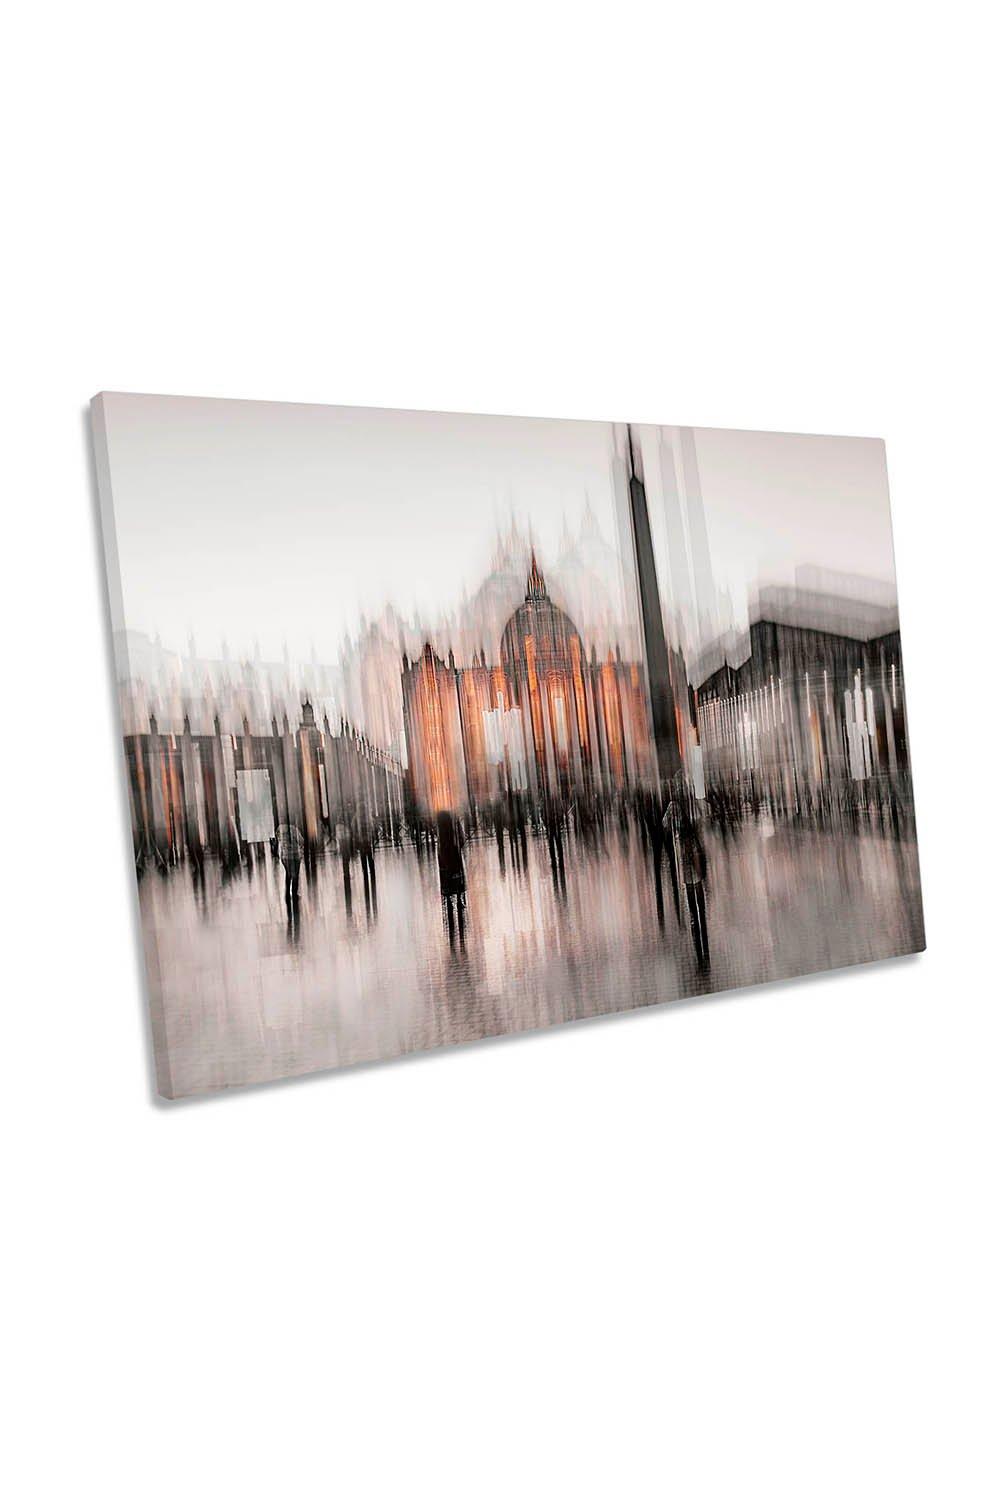 St Peters Square Rome Abstract City Canvas Wall Art Picture Print